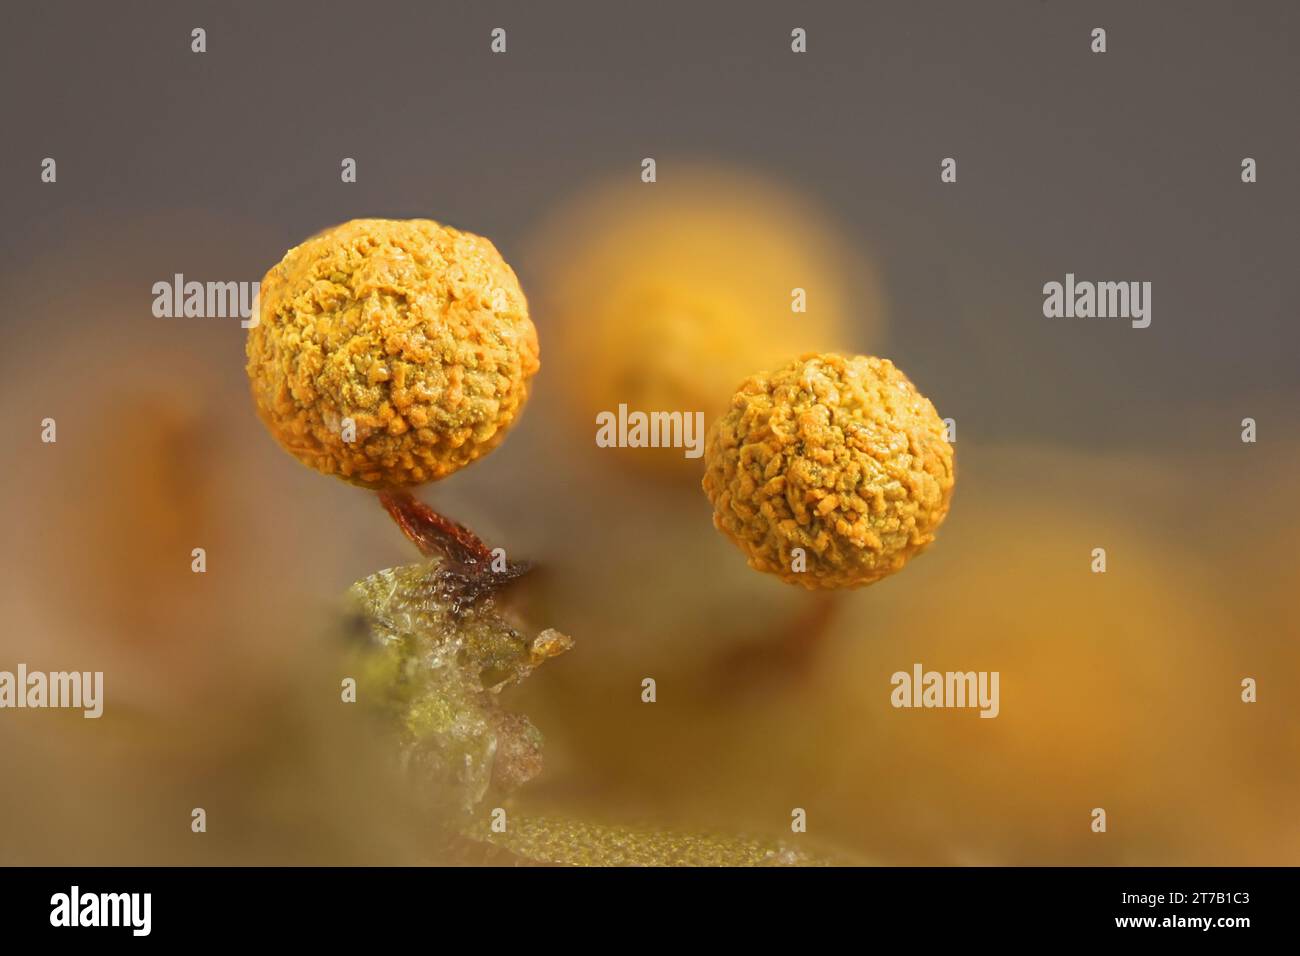 Physarum oblatum, also called Physarum maydis, slime mold from Finland, no common English name Stock Photo